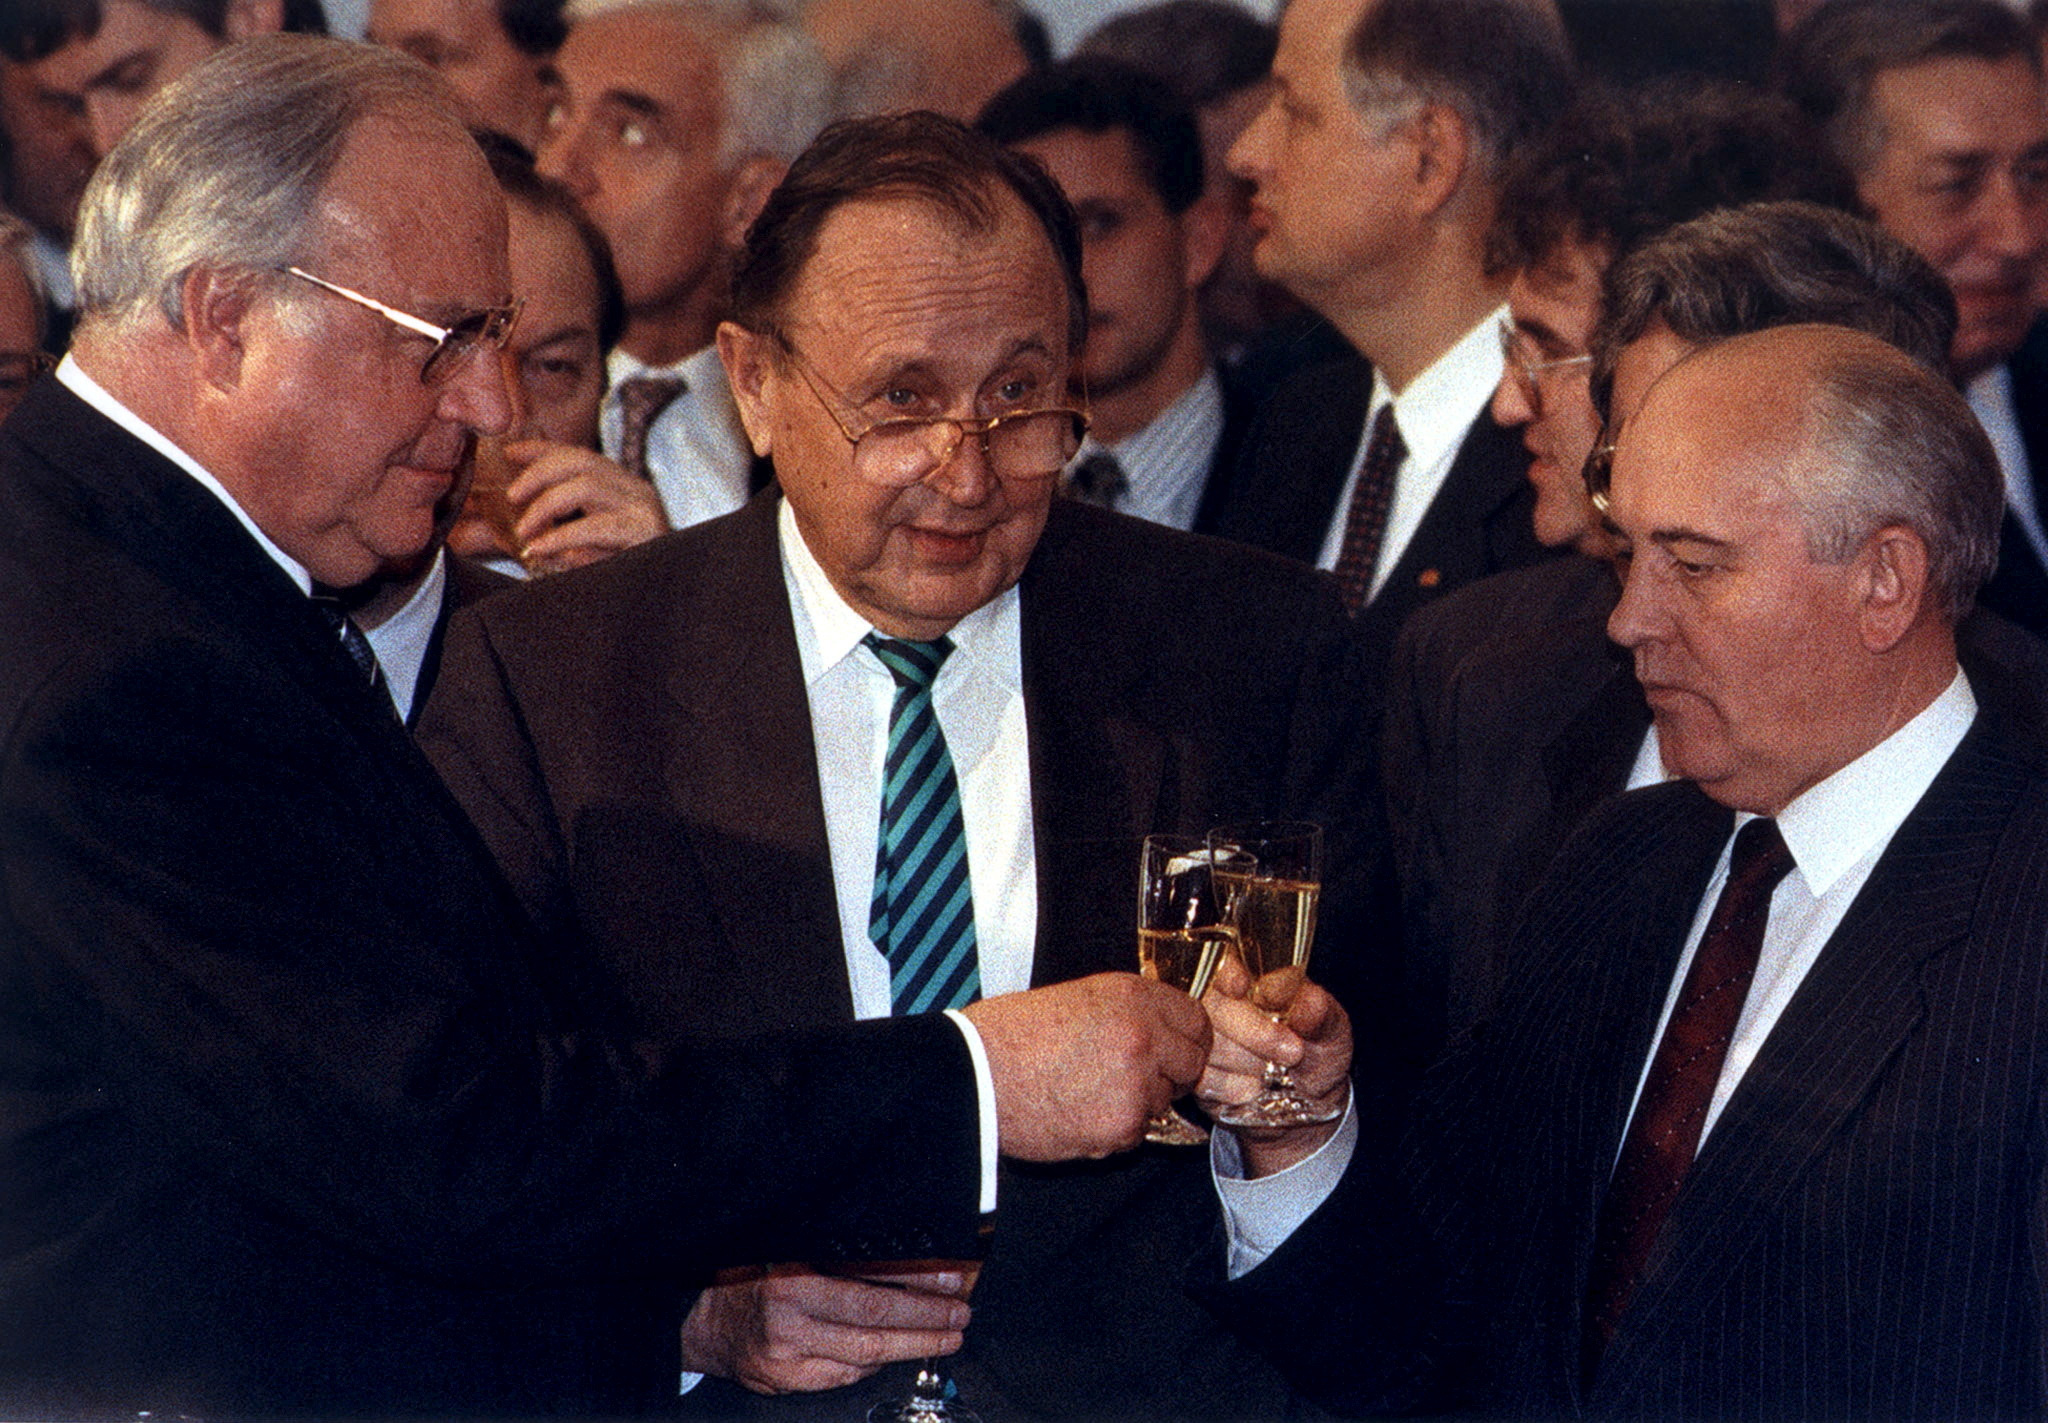 File photo of Helmut Kohl toasting with former Soviet leader Mikhail Gorbachev and former German Foreign Minister Hans-Dietrich Genscher